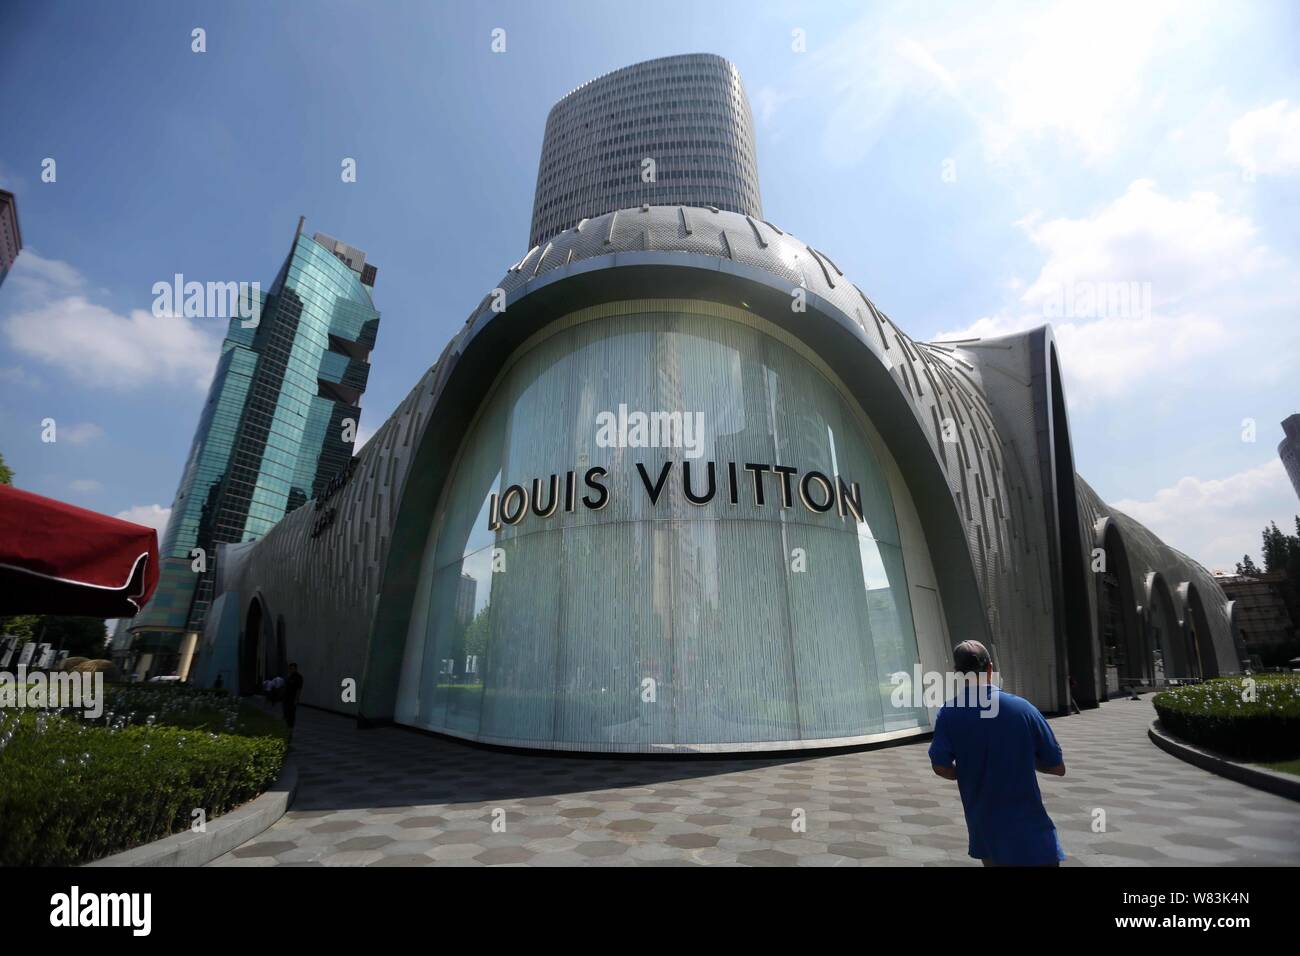 Visited the @louisvuitton headquarters and had the chance to